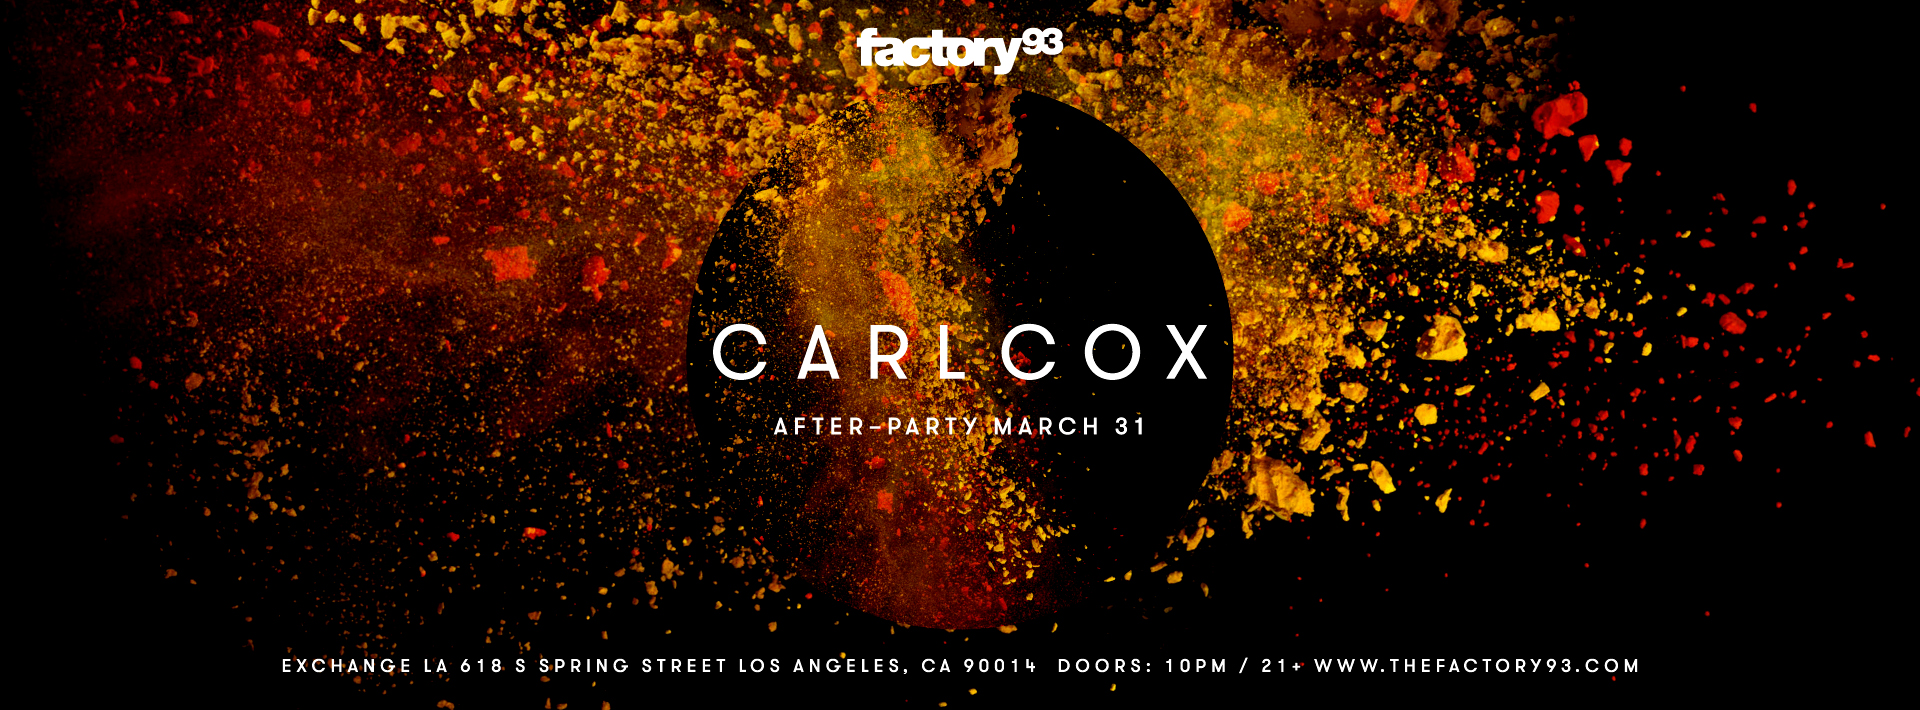 Carl Cox After-Party